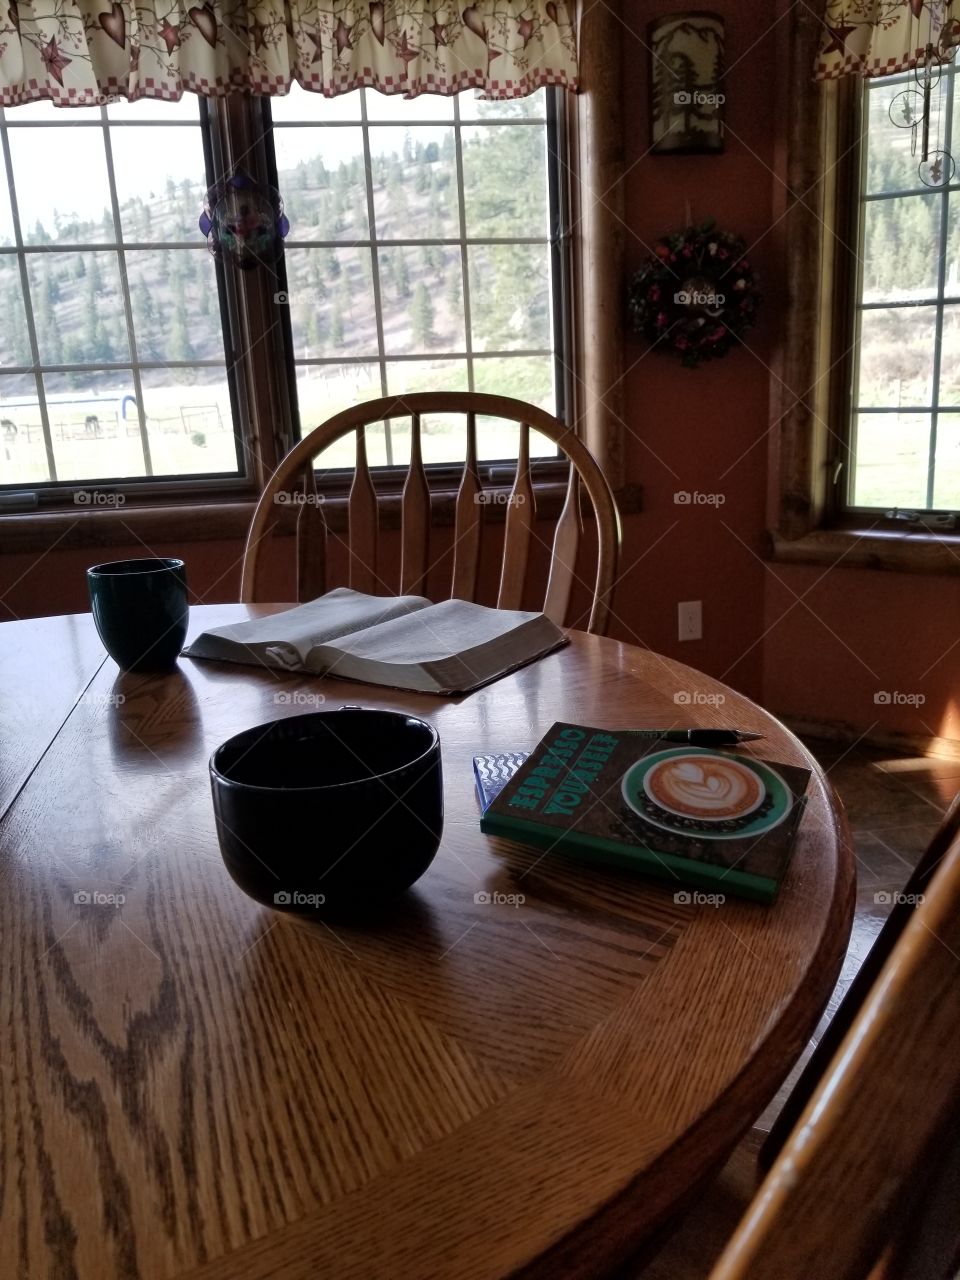 kitchen table is a family favorite place to hang out. from reading to chatting to eating to observing the world outside.  this sunny nook is the best seat on the house